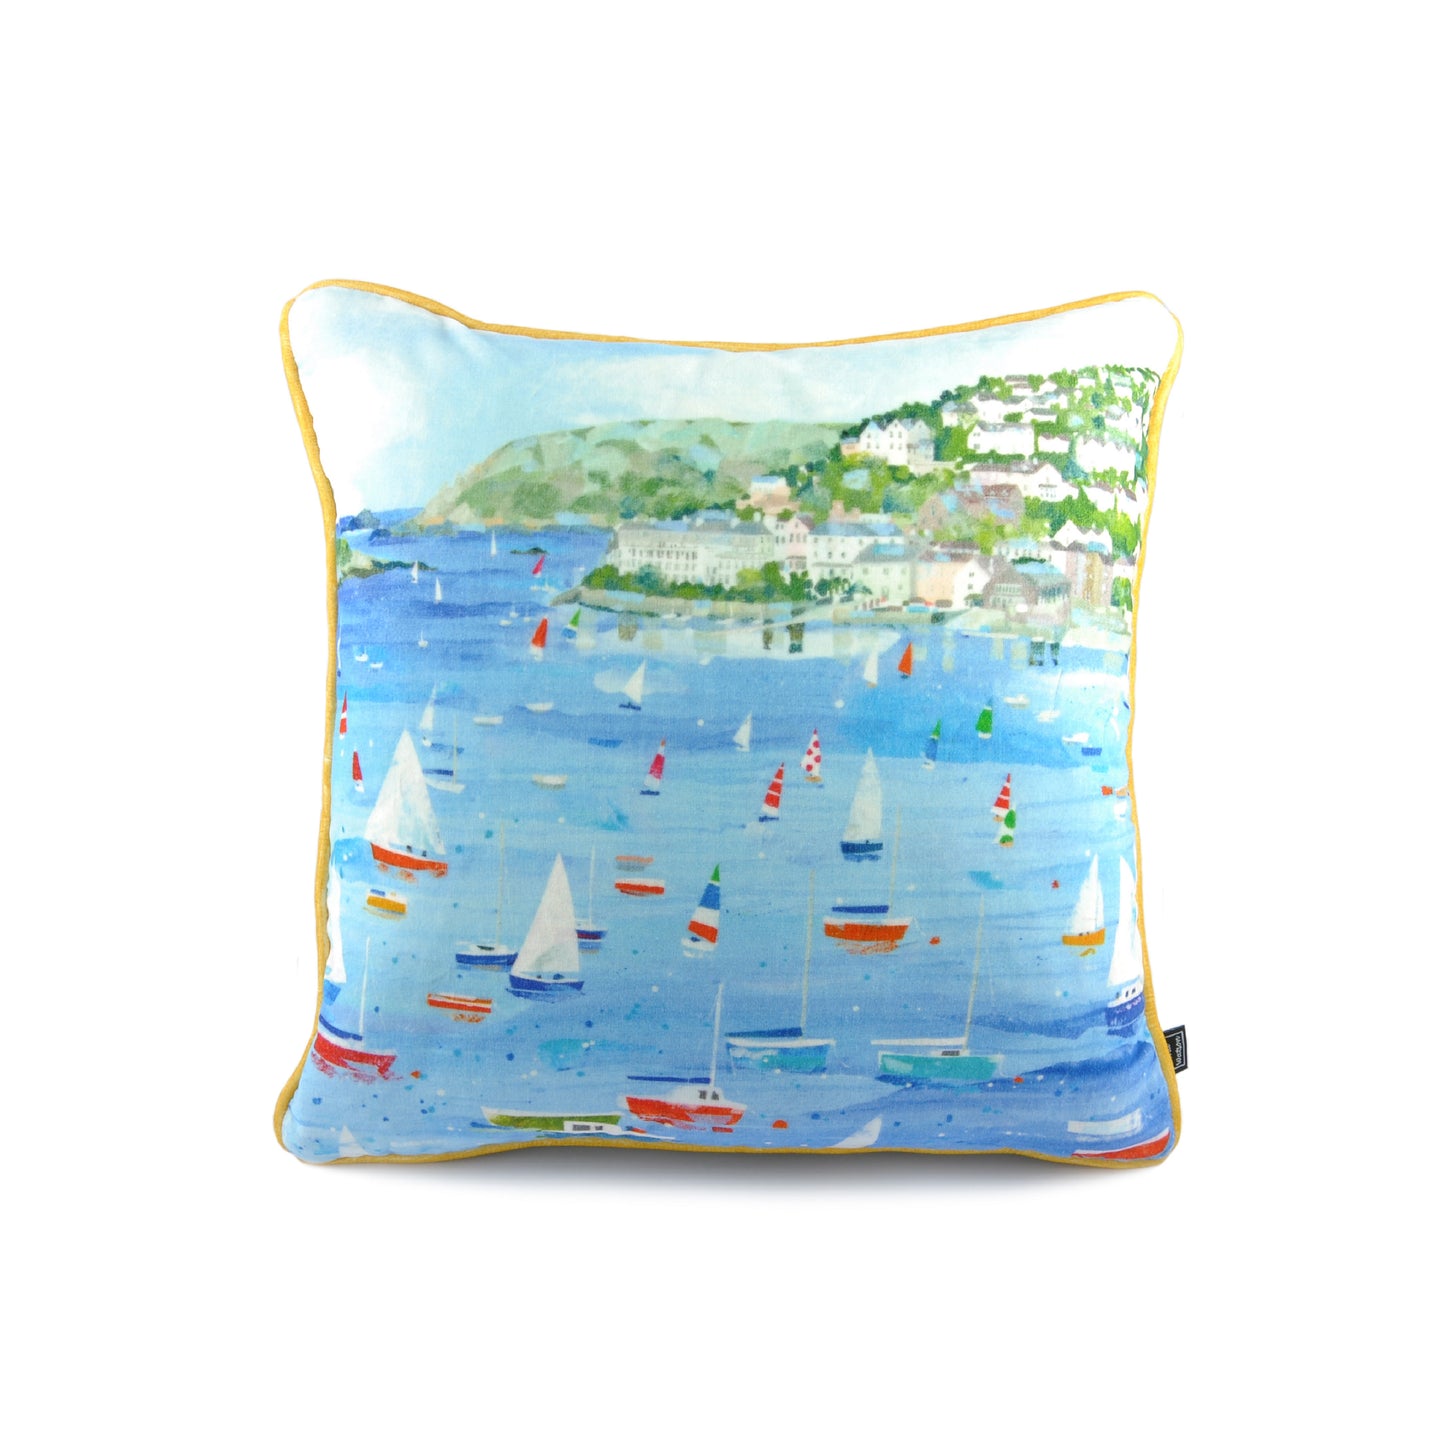 Luxury filled duck feather cushion with cotton velvet cover with original artwork by Claire Henley of sailing boats at Salcombe and contrasting yellow piped edging.